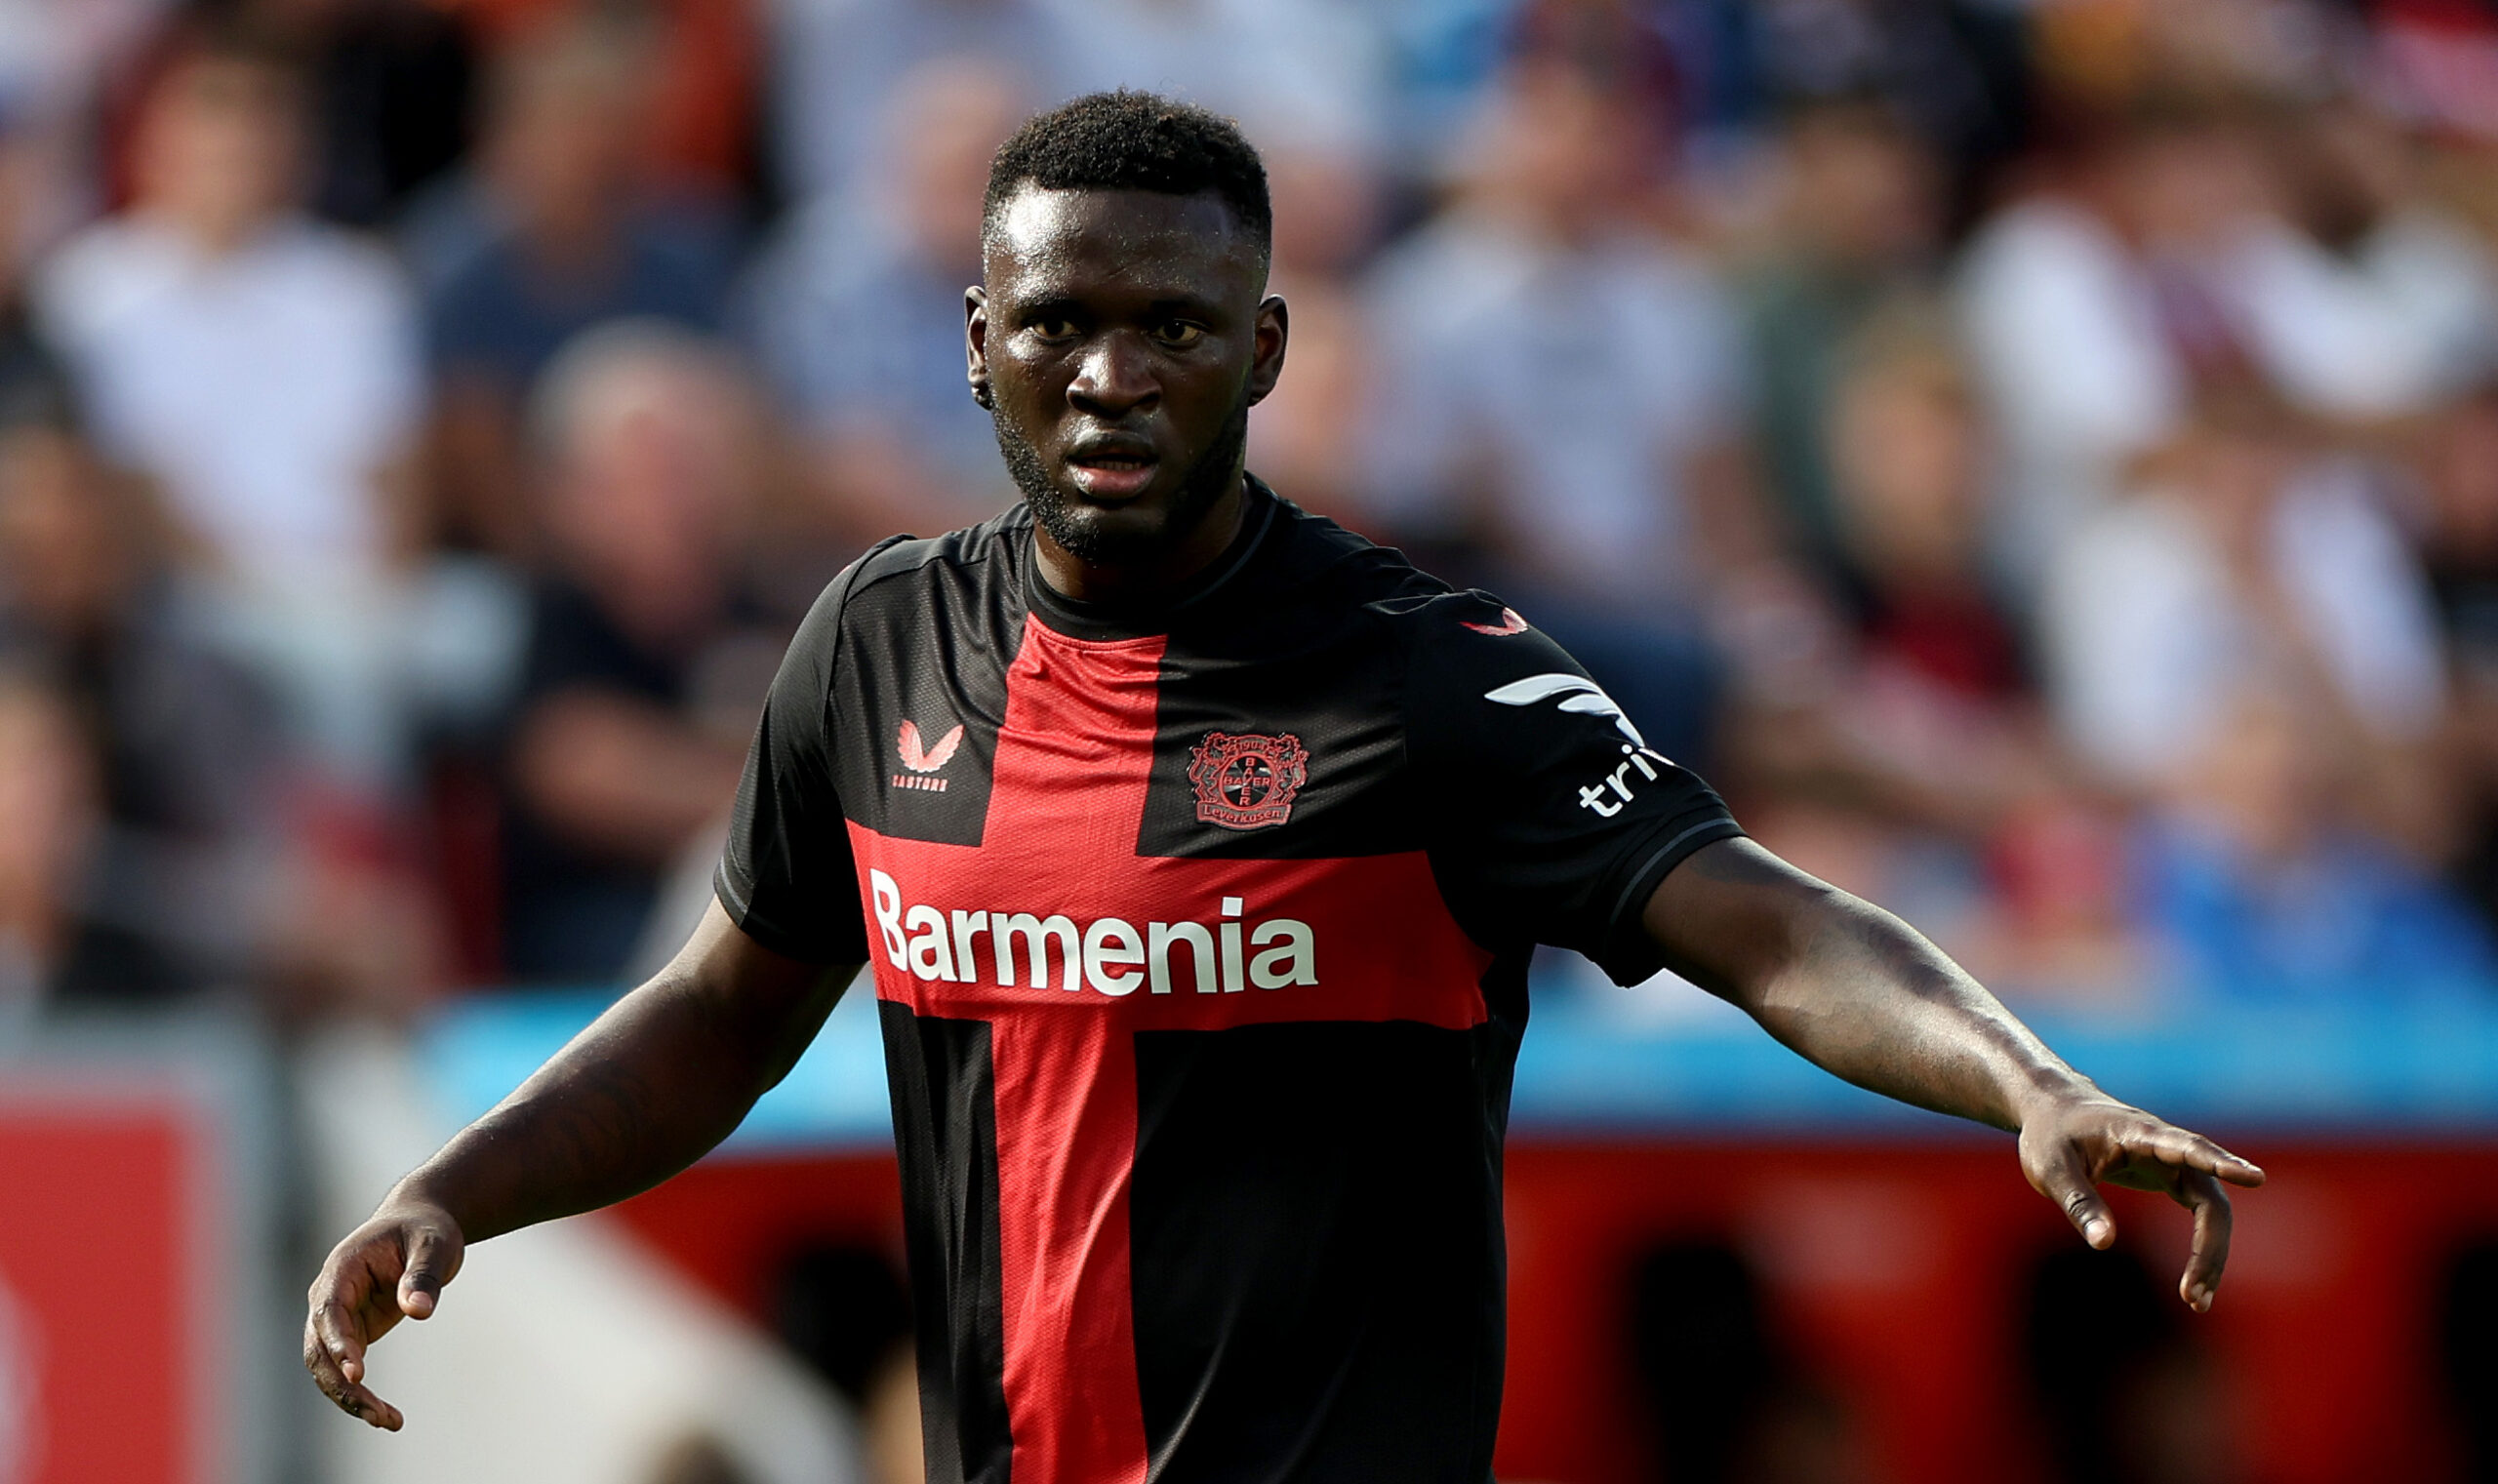 Victor Osimhen alluded he would take the next step in his career at the end of the season, and president Aurelio De Laurentiis stated they were aware of it.